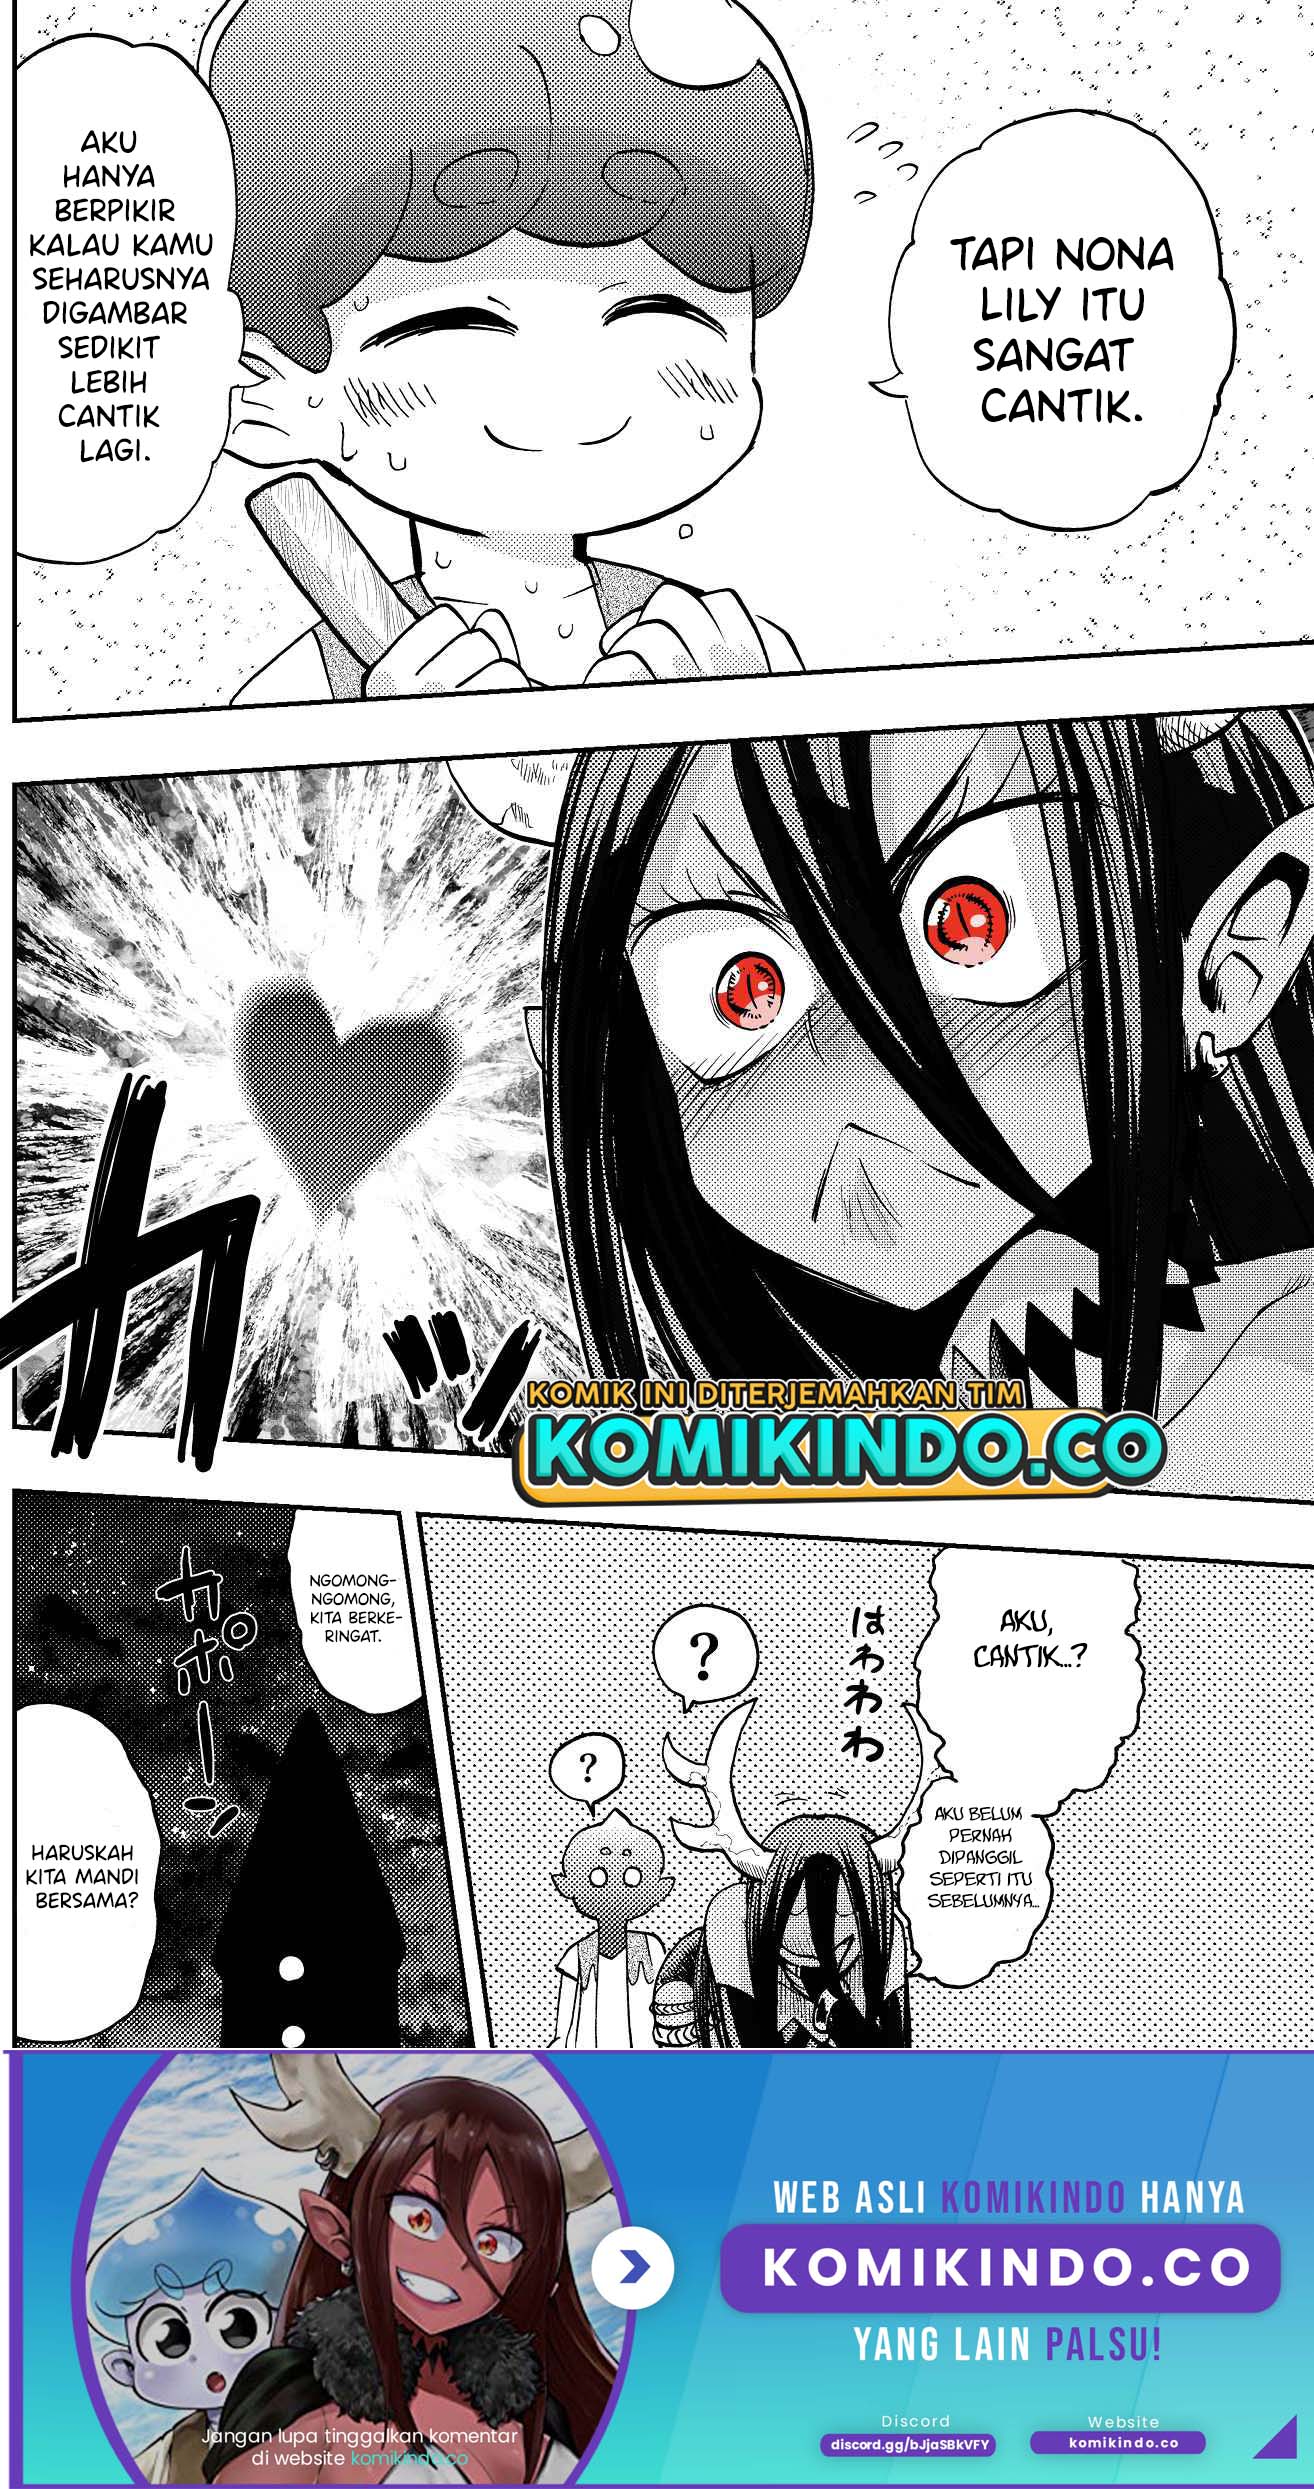 Level 999 Demon Lord and a Level 1 Slime Chapter 02